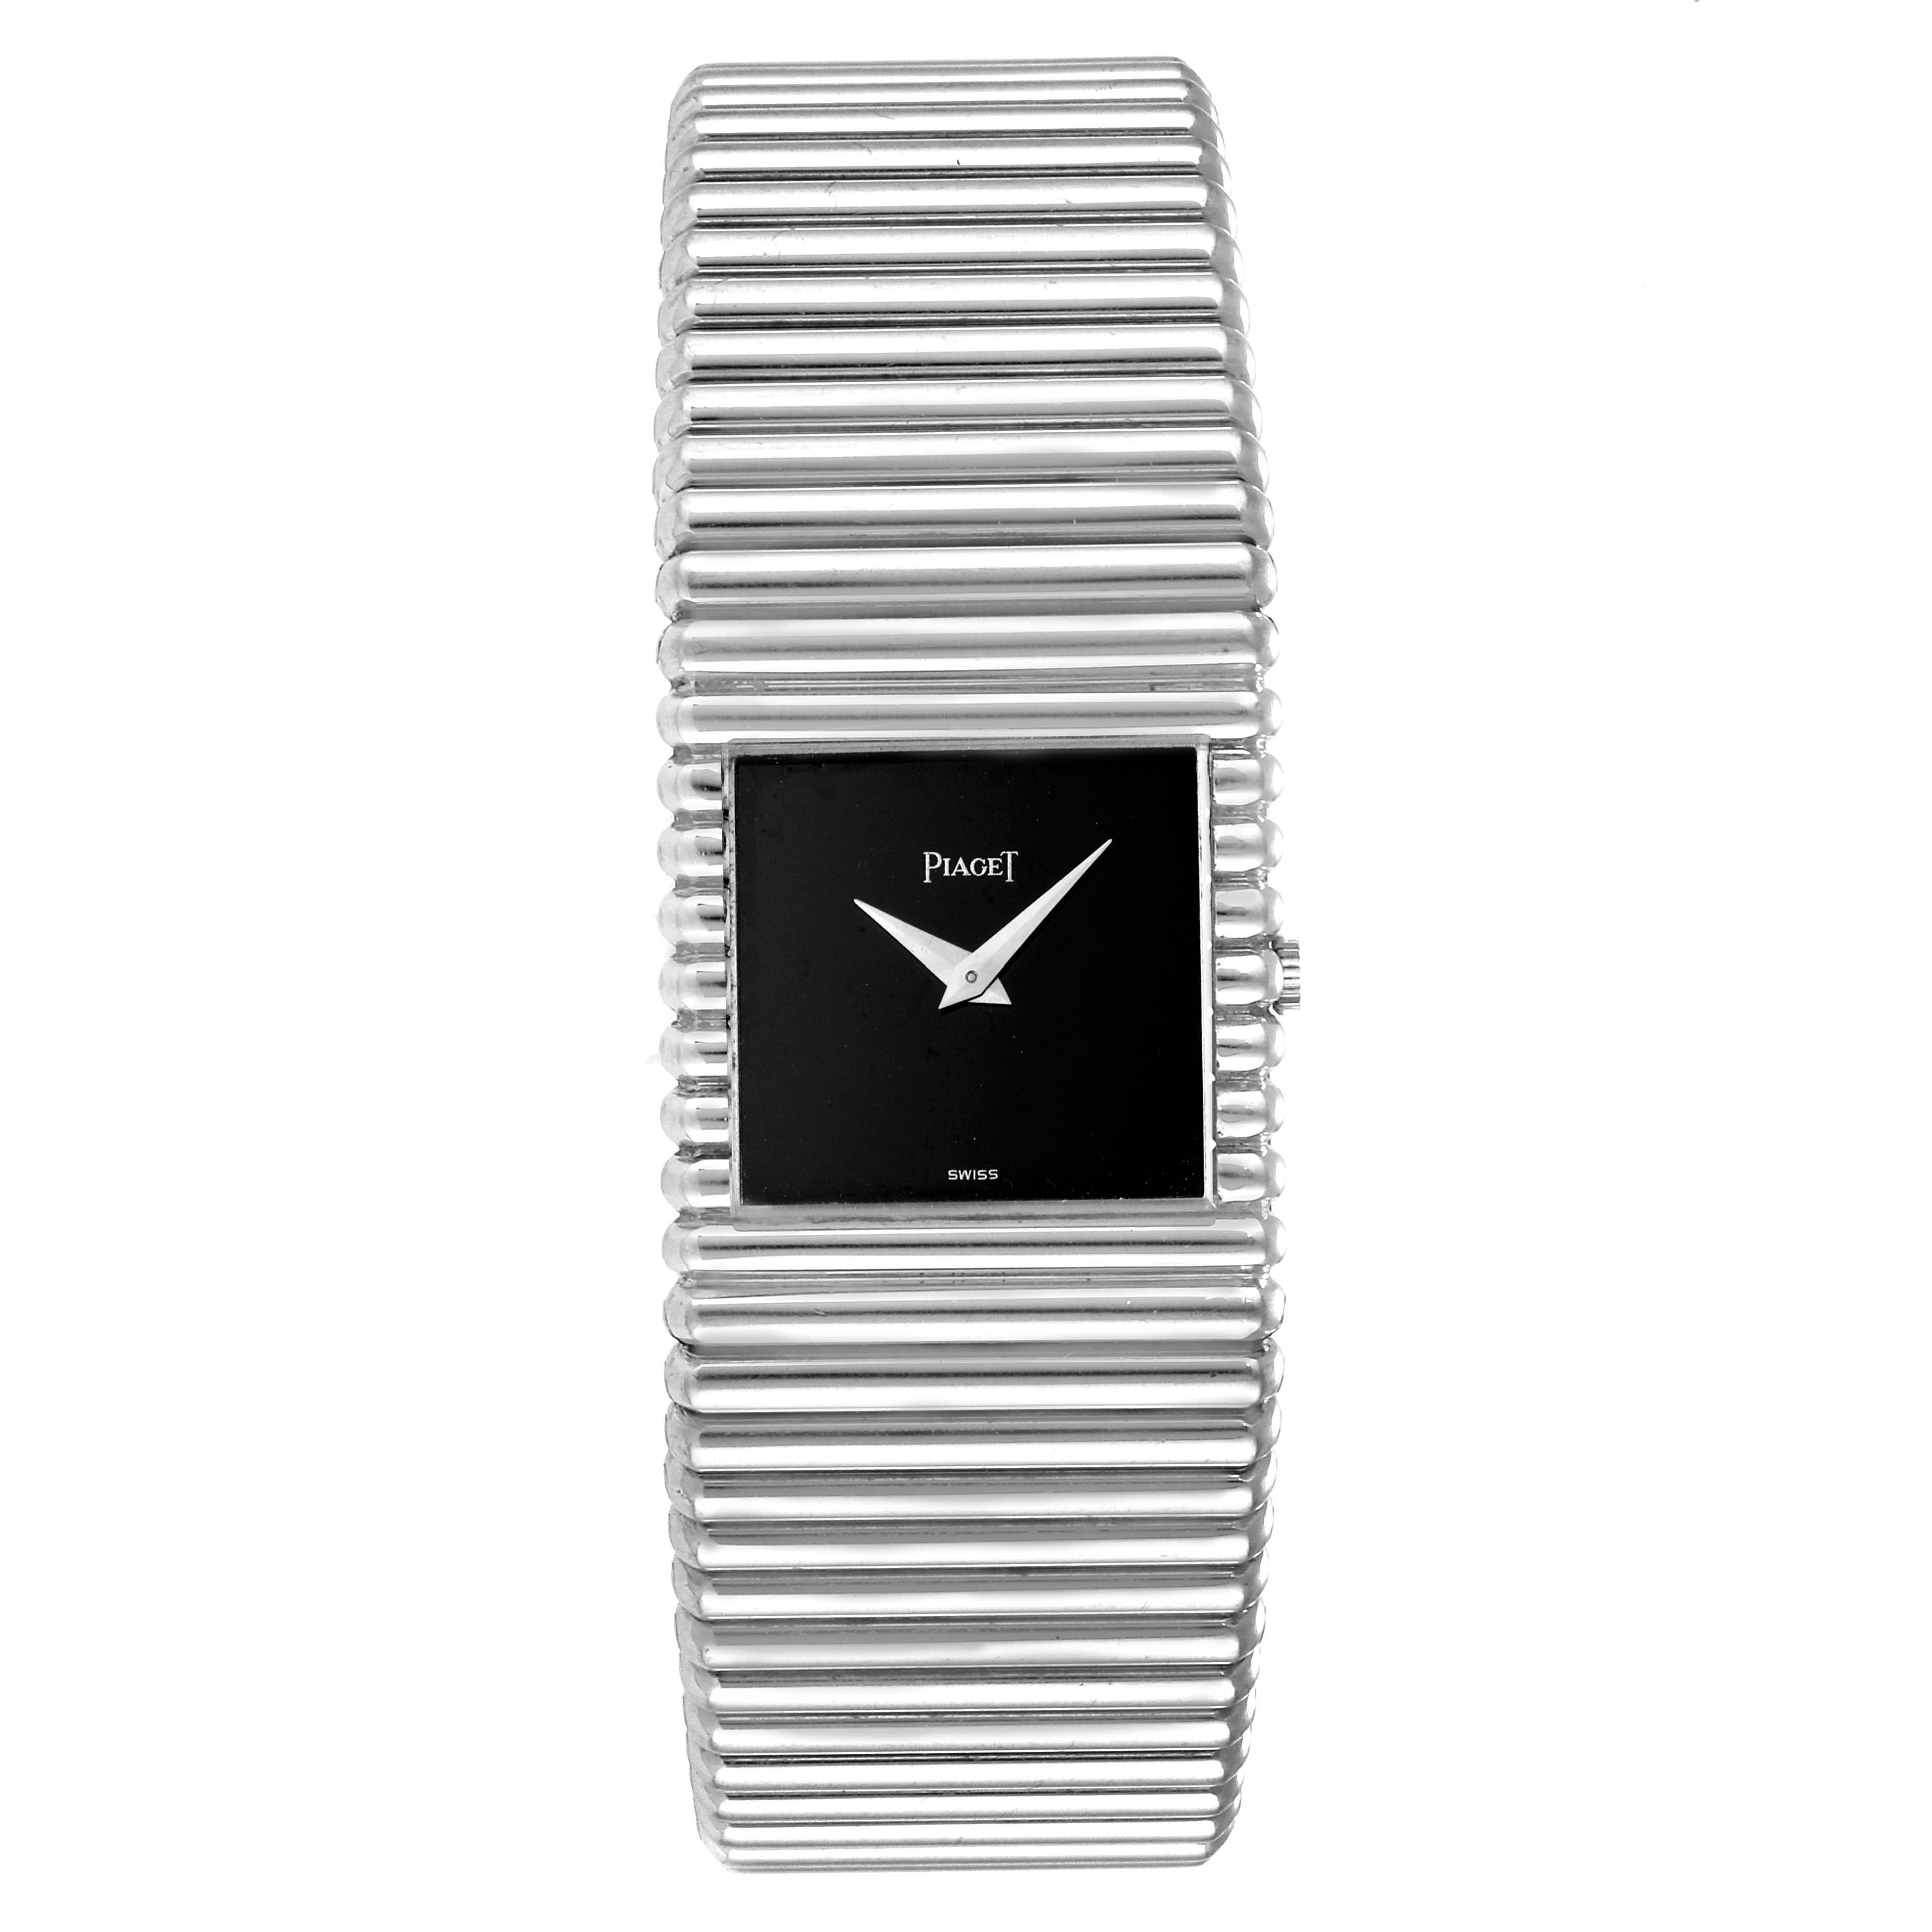 Piaget Polo 18K White Gold Black Dial Mens Watch 9131. Manual winding movement. Brushed and polished 18k white gold case 25.0 x 22.0 mm. . Scratch resistant sapphire crystal. Black dial. Brushed and polished 18k white gold bracelet. Fits 7